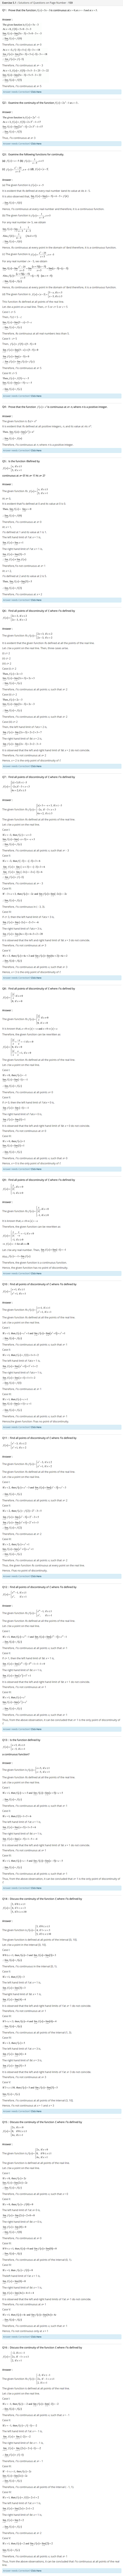 NCERT Solutions for Class 12 Maths Chapter 5 Continuity and Differentiability 1